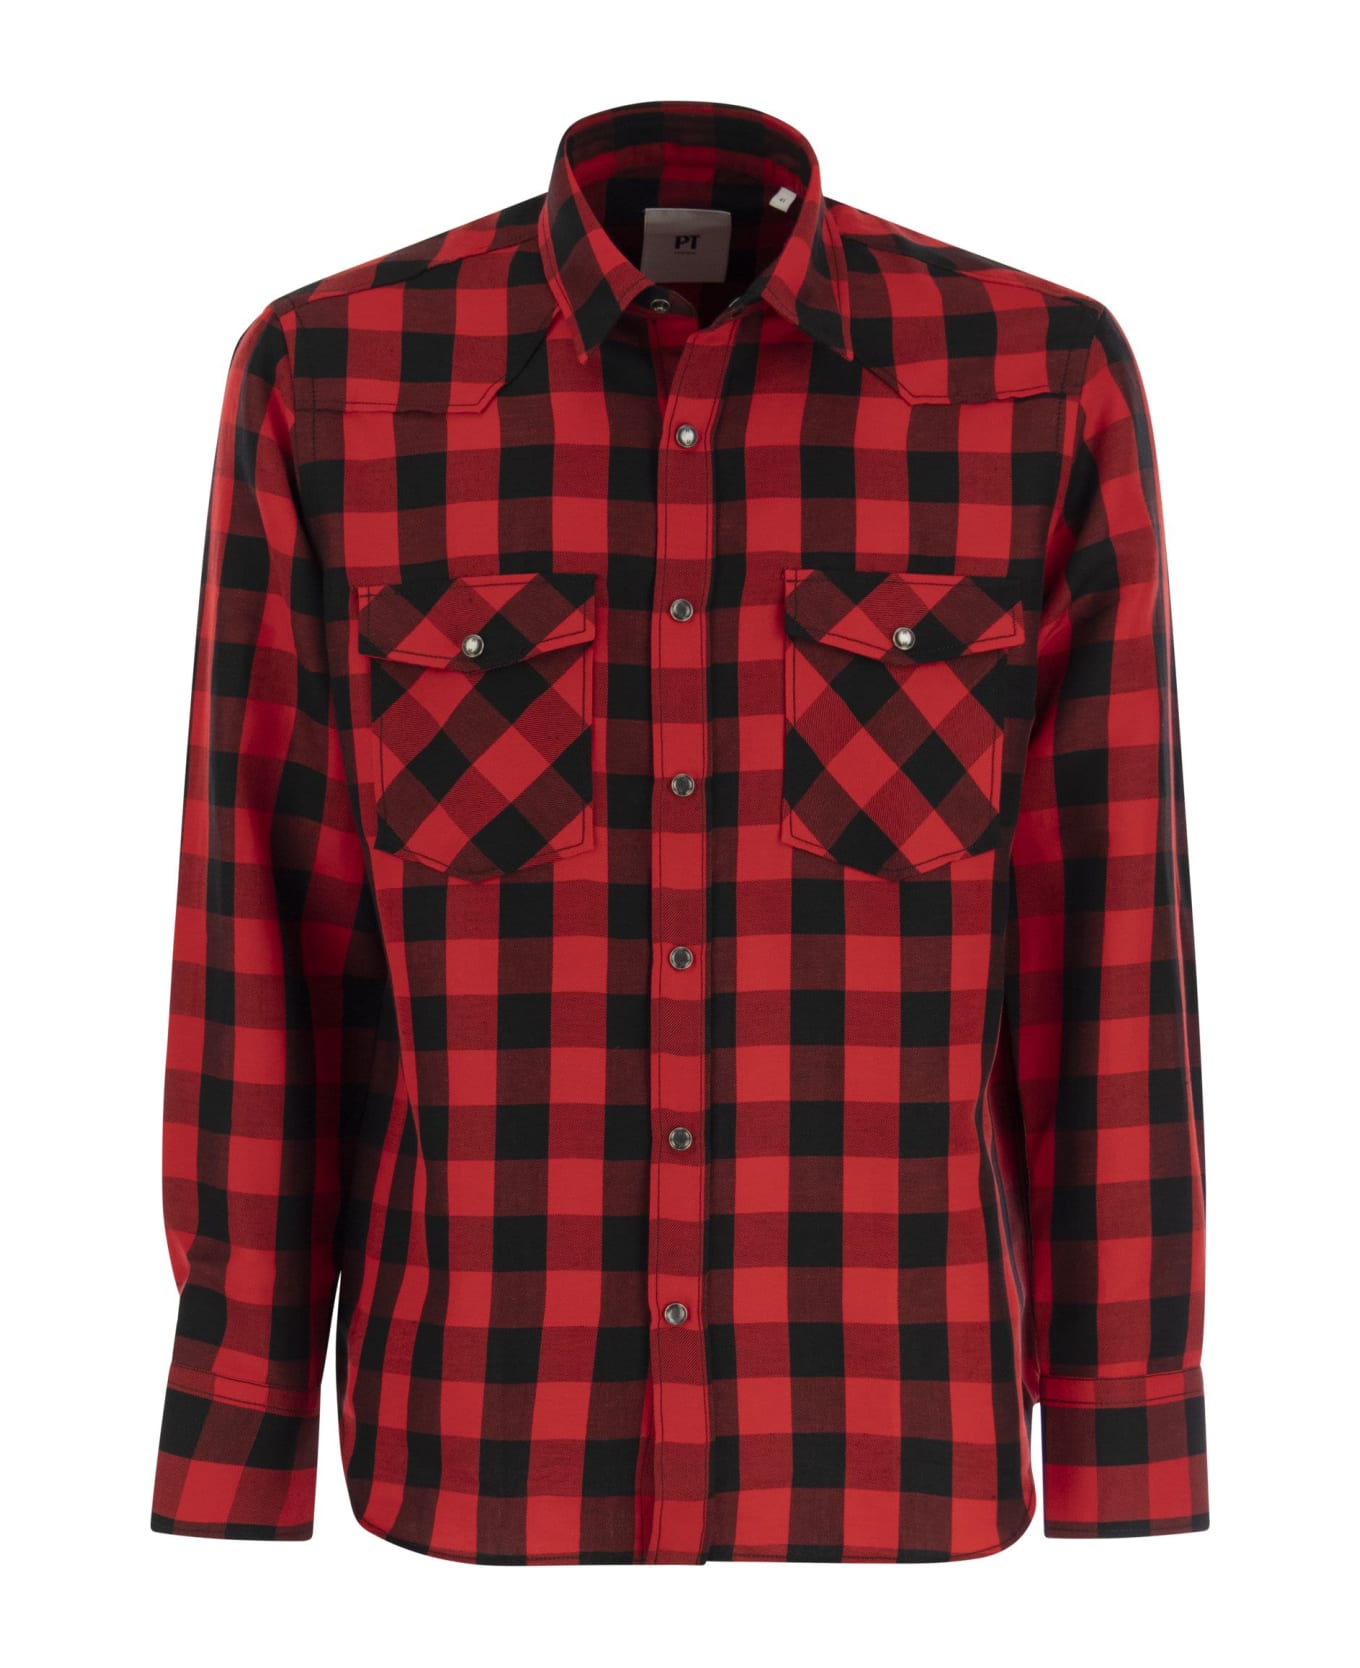 PT Torino Checked Shirt In Cotton And Linen Blend - Red/black